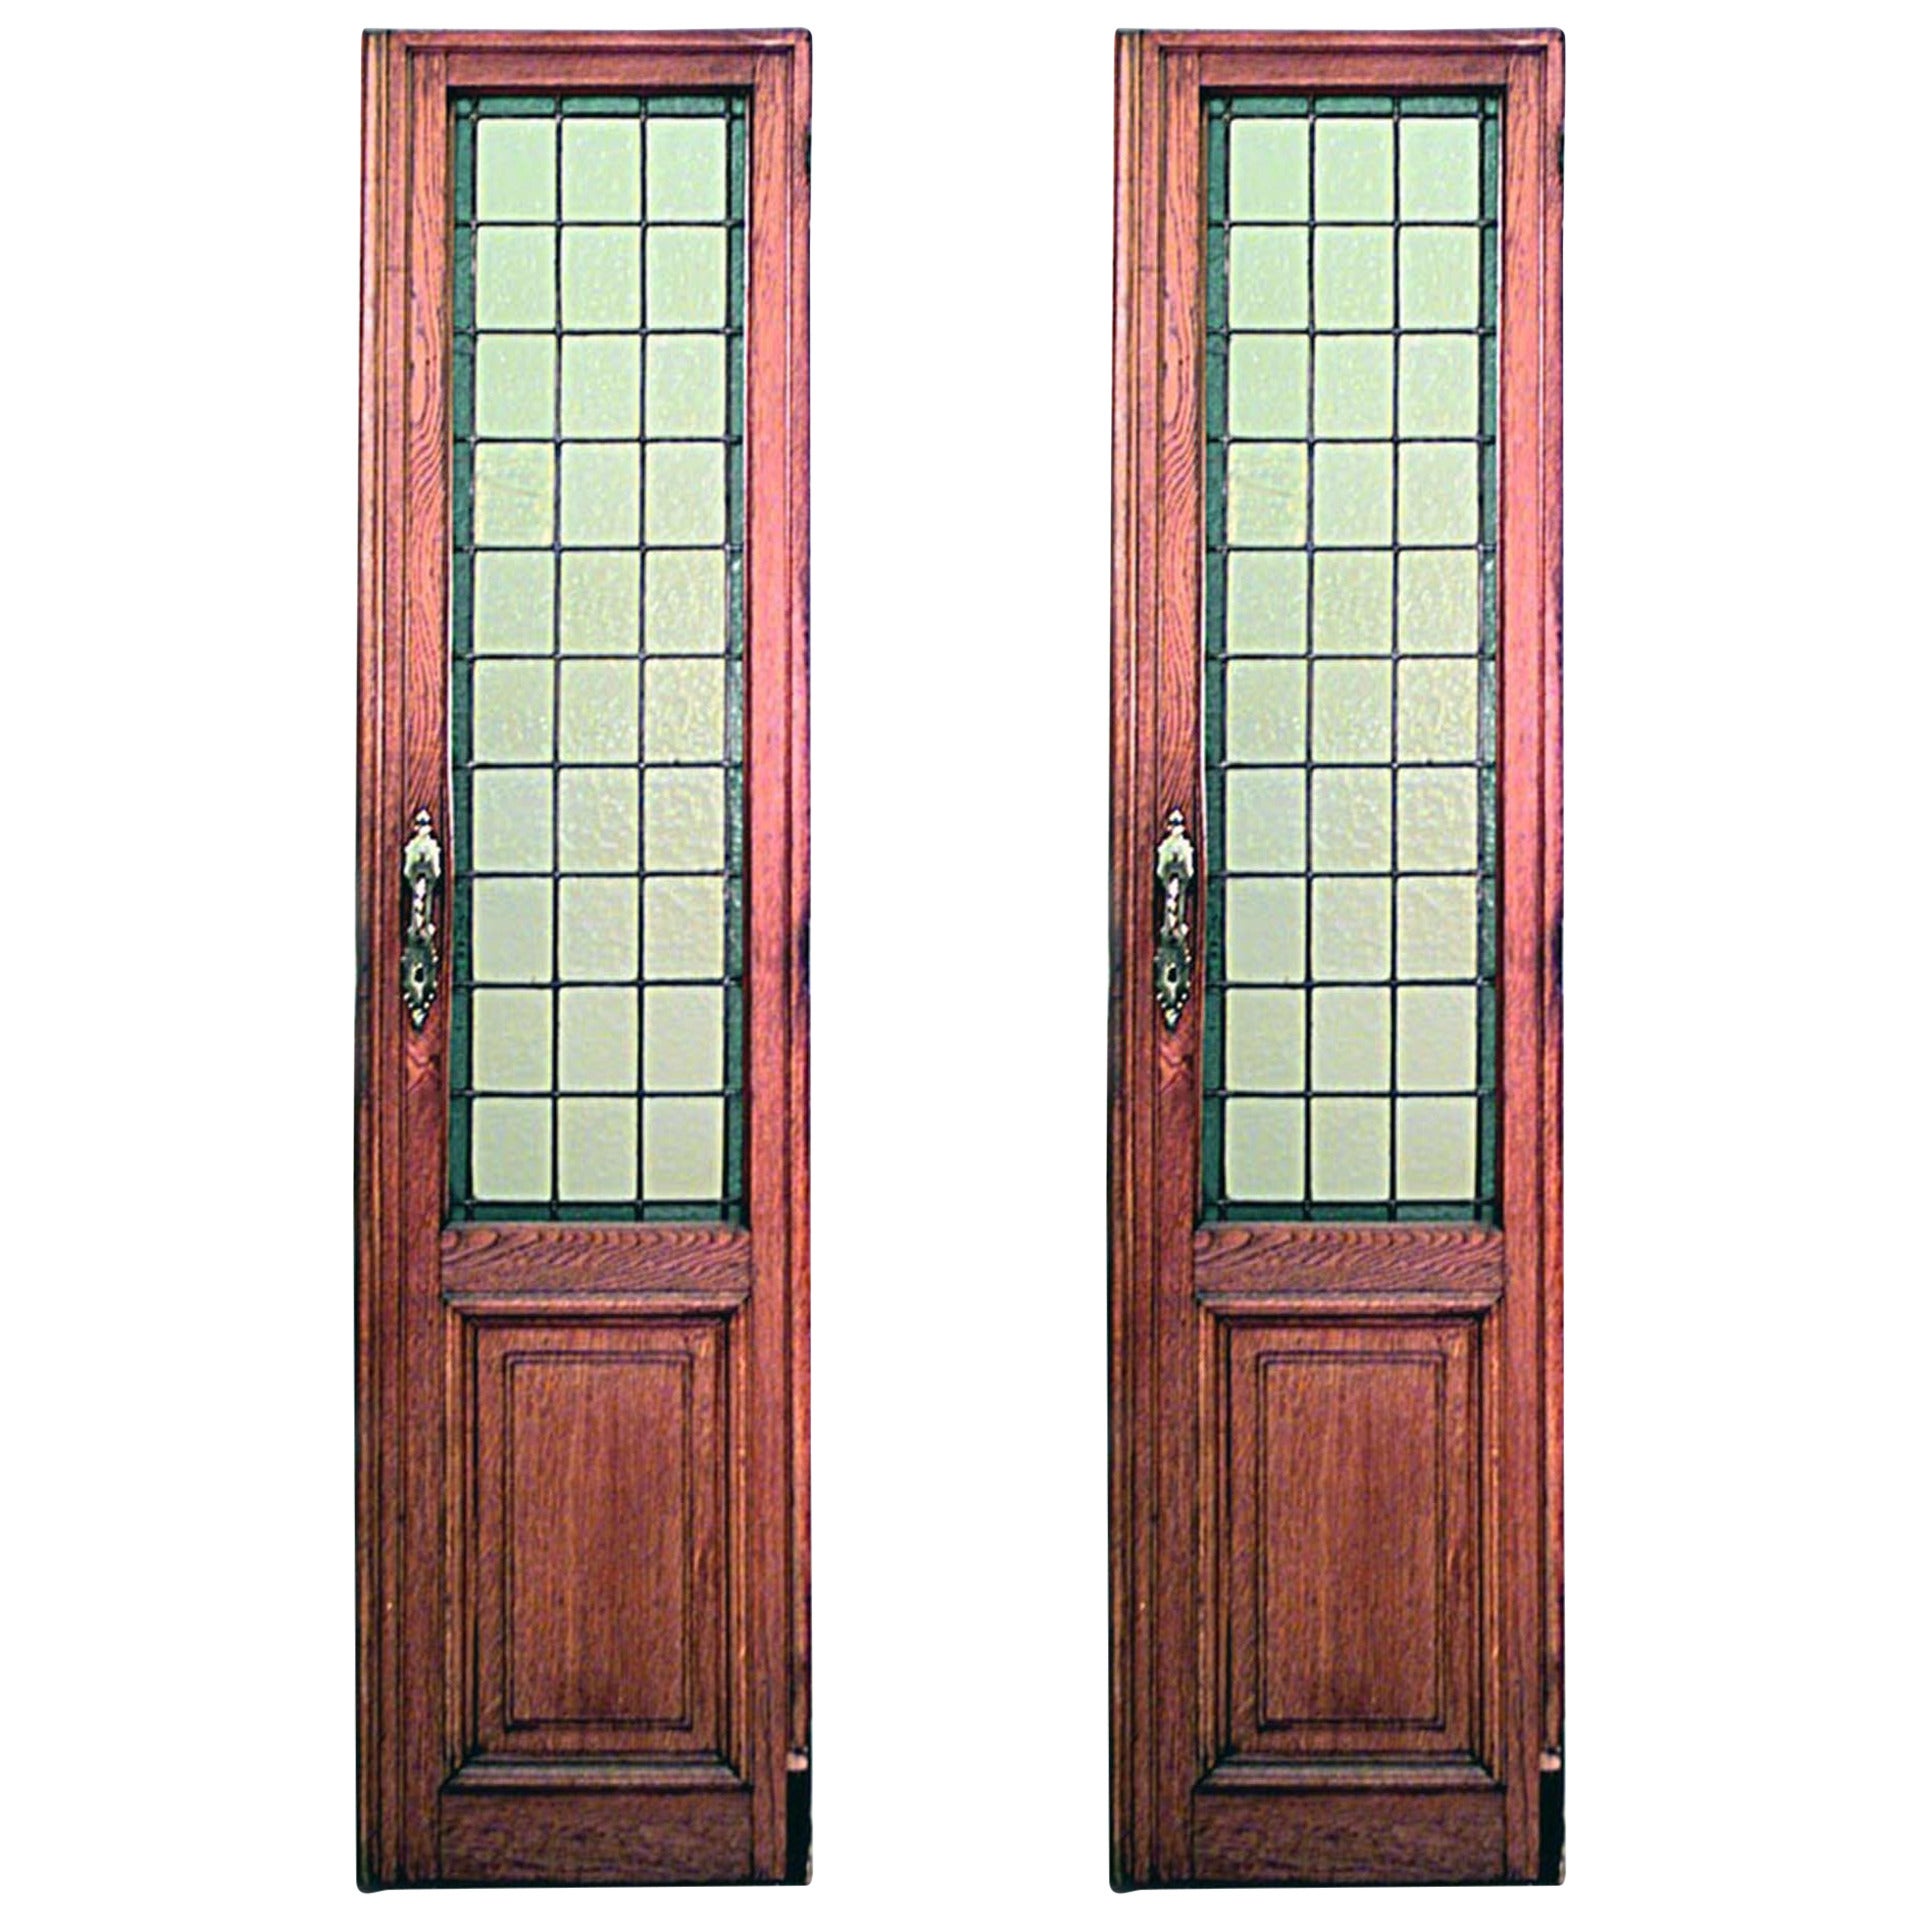 Pair of American Mission Oak Framed Doors with Tinted Leaded Glass Panels